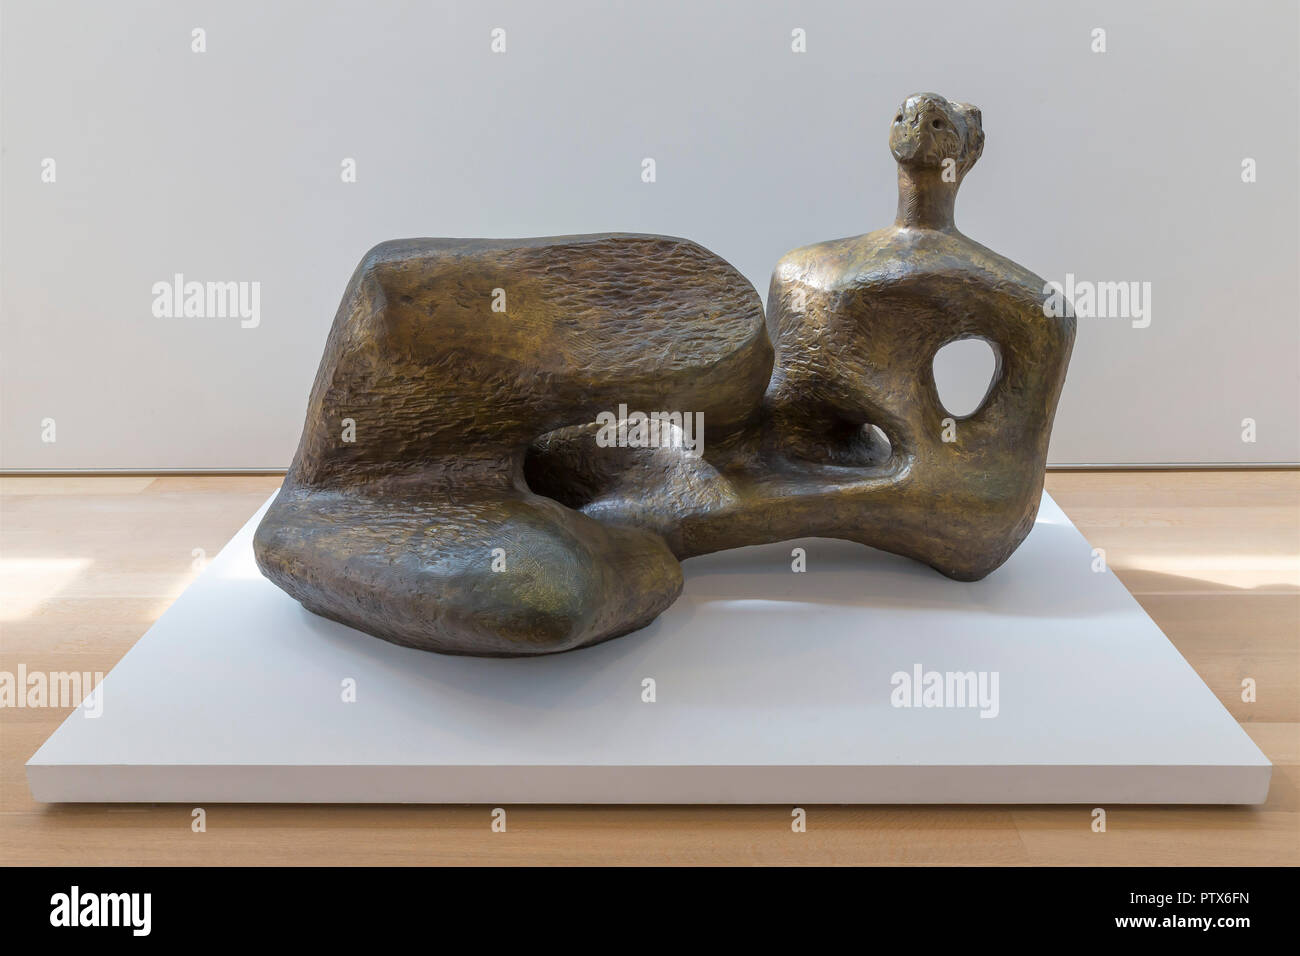 Maquette for UNESCO Reclining Figure, Henry Moore, 1957, Art Institute of Chicago, Chicago, Illinois, USA, North America Stock Photo